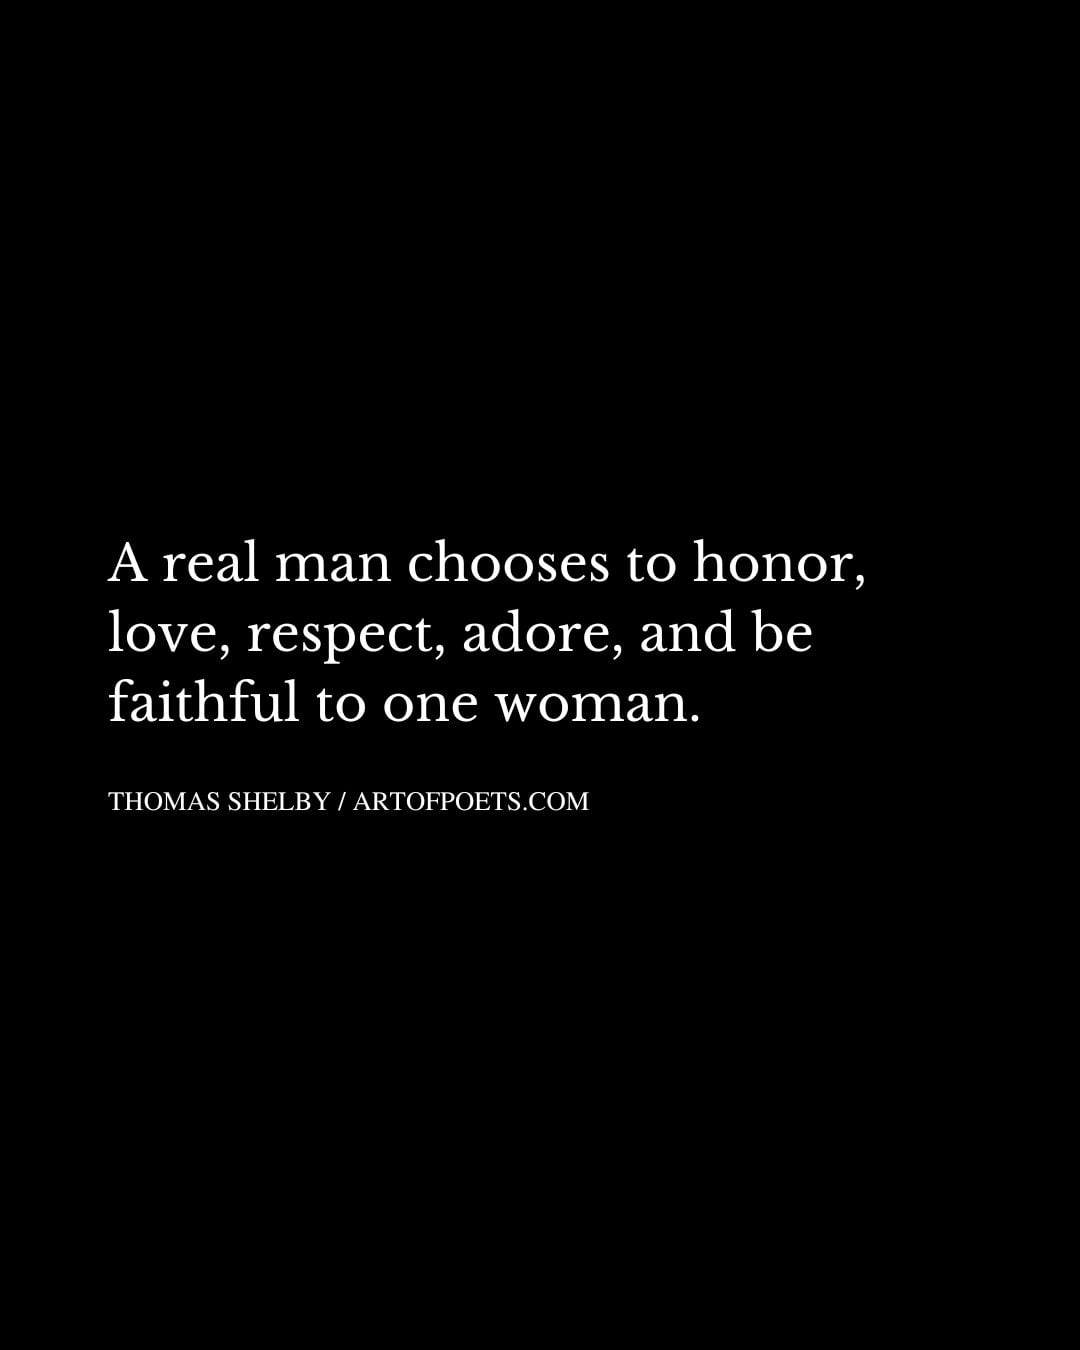 A real man chooses to honor love respect adore and be faithful to one woman